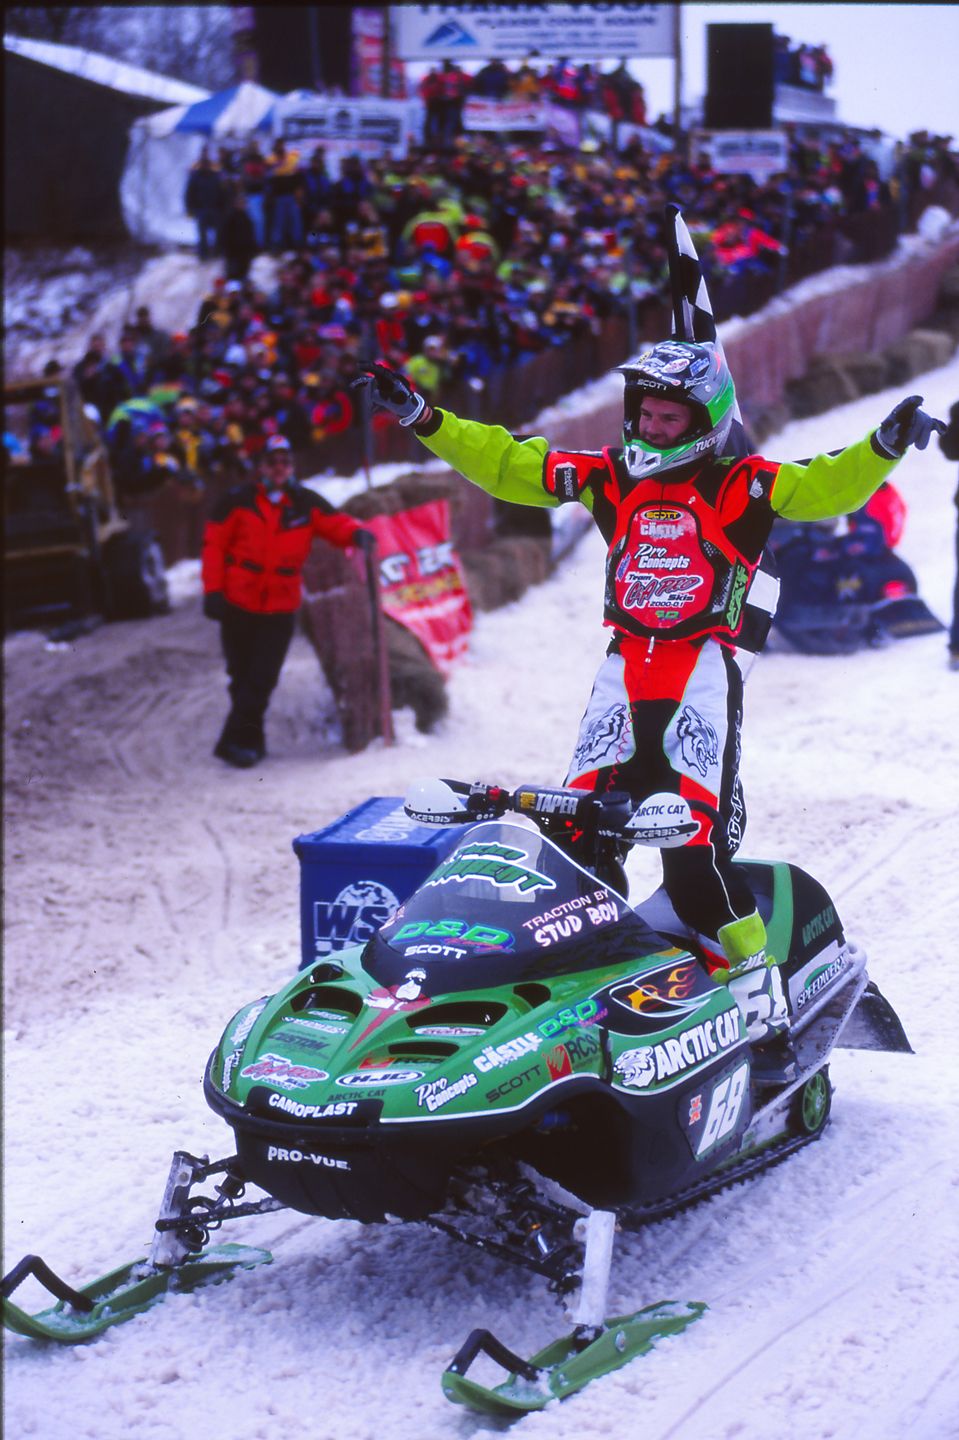 Tucker Hibbert wins Pro Open in his debut in the class, circa 2000. Photo by ArcticInsider.com